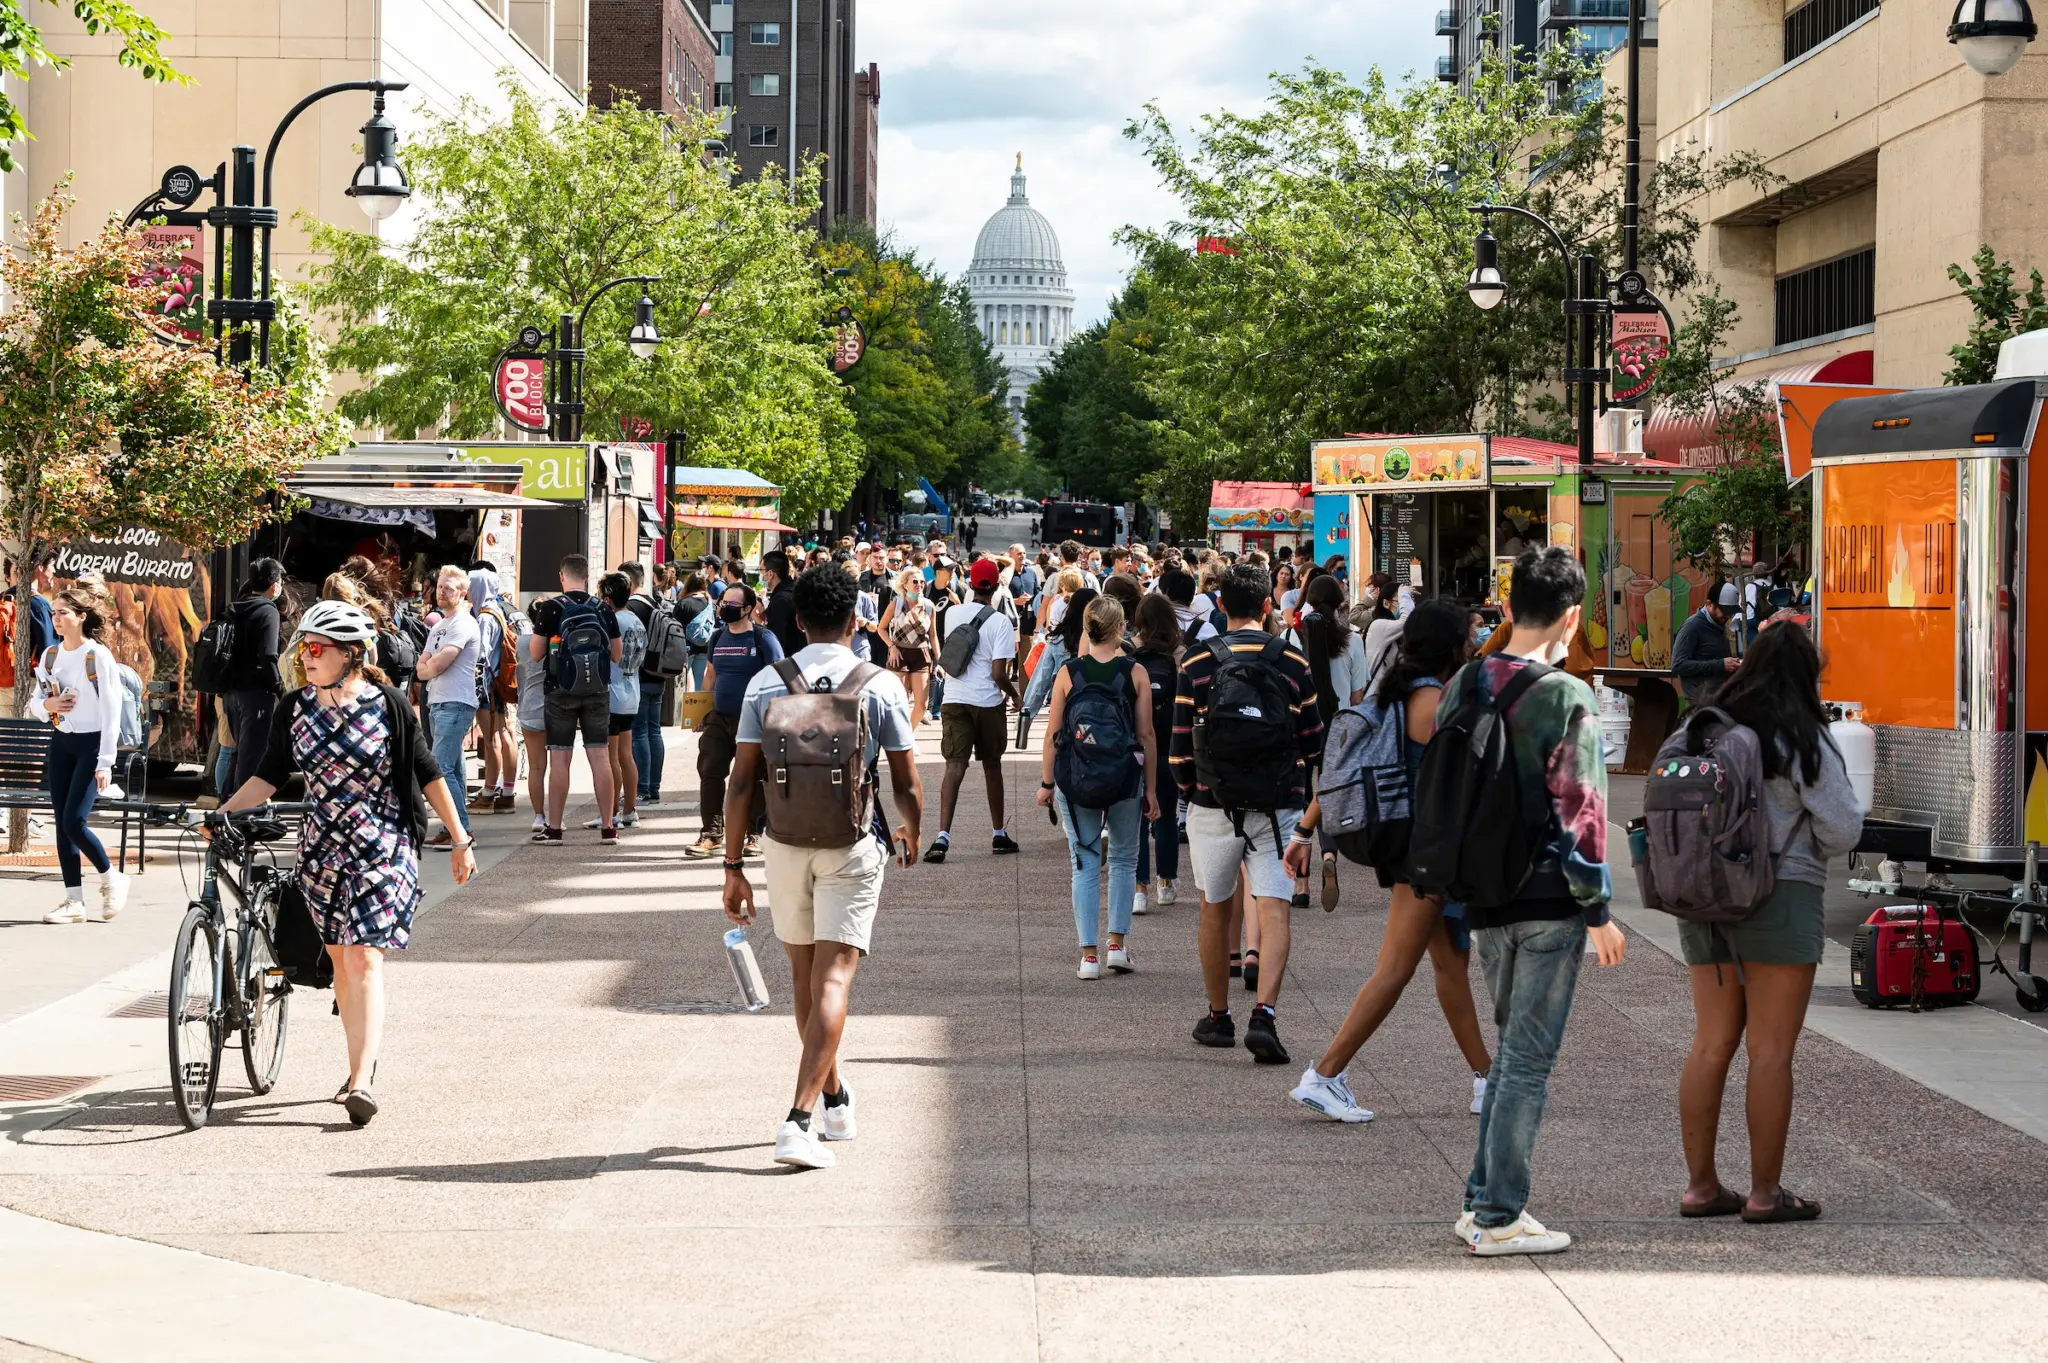 Students and pedestrians on state street shopping